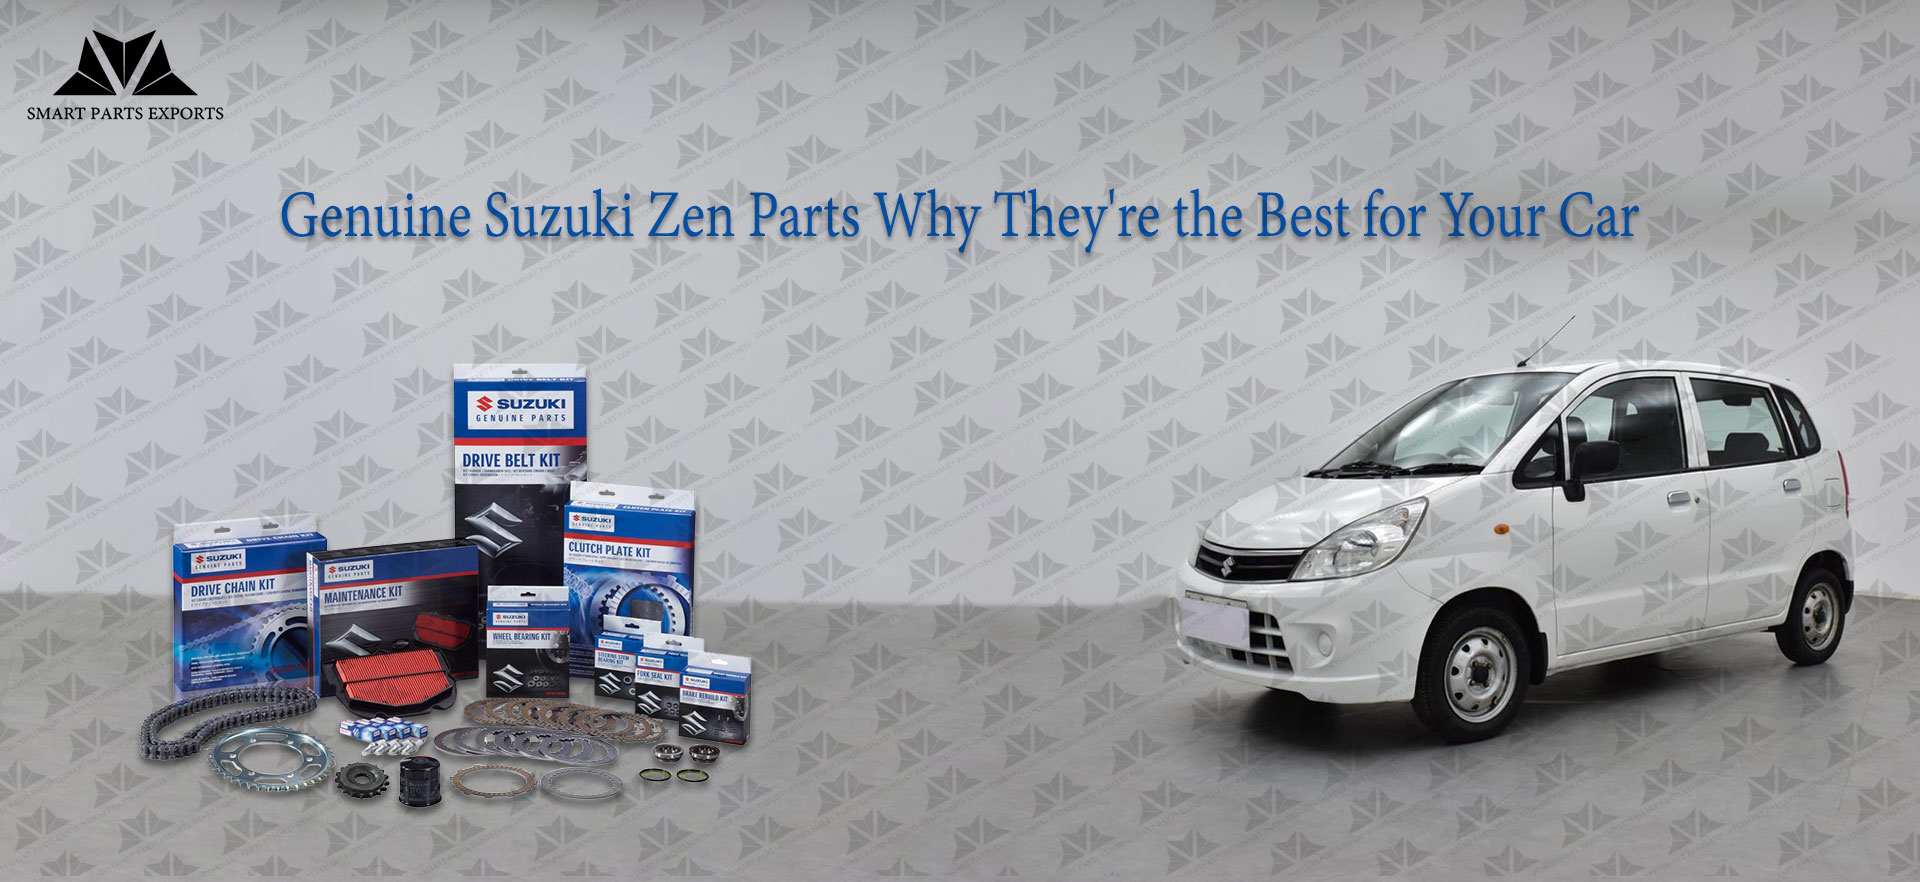 Suzuki Zen Genuine Parts: Why They're the Best for Your Car